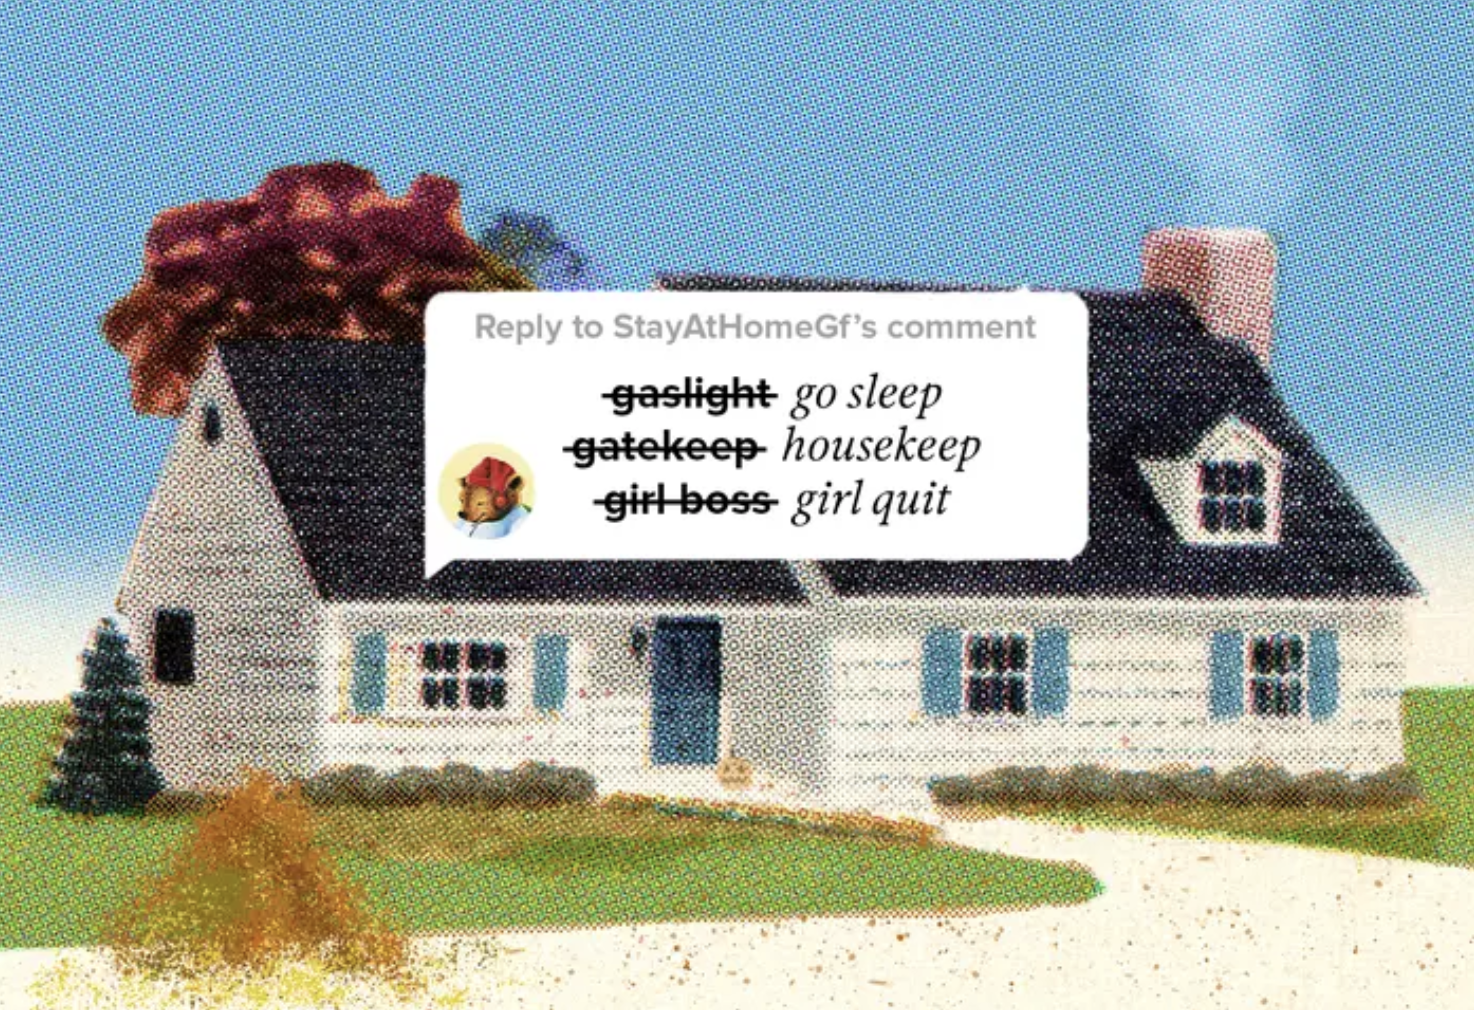 an illustration of a scenic cottagey house overlayed with a reply to a social media comment that says &quot;go sleep, housekeep, girl quit&quot;